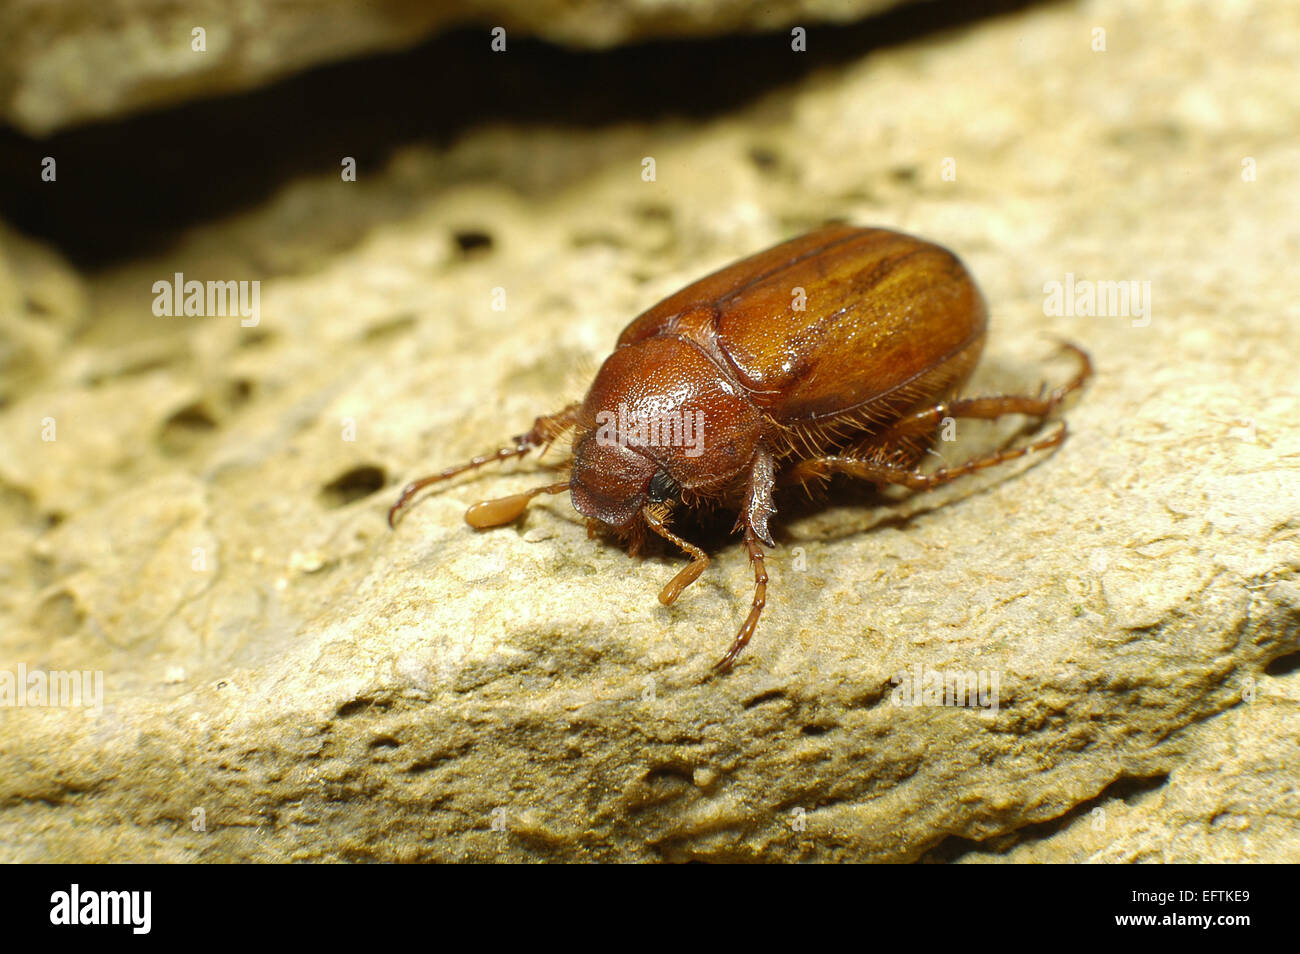 Hesse, Germany. 10th February, 2015. HANDOUT - A handout picture made available on 10 February 2015 by Franz Rahn shows a rhizotrogus cicatricosus, a red-brown, around 1.5cm-long scarab in Kassel, Germany. The rare scarab has been identified in Hesse for the first time. A Kassel-based biologist and beetle specialist discovered it on Dreienberg hill in the north of the Rhoen region. Photo: FRANZ RAHN dpa ( and with mandatory source credit: source 'Franz Rahn') Credit:  dpa picture alliance/Alamy Live News Stock Photo